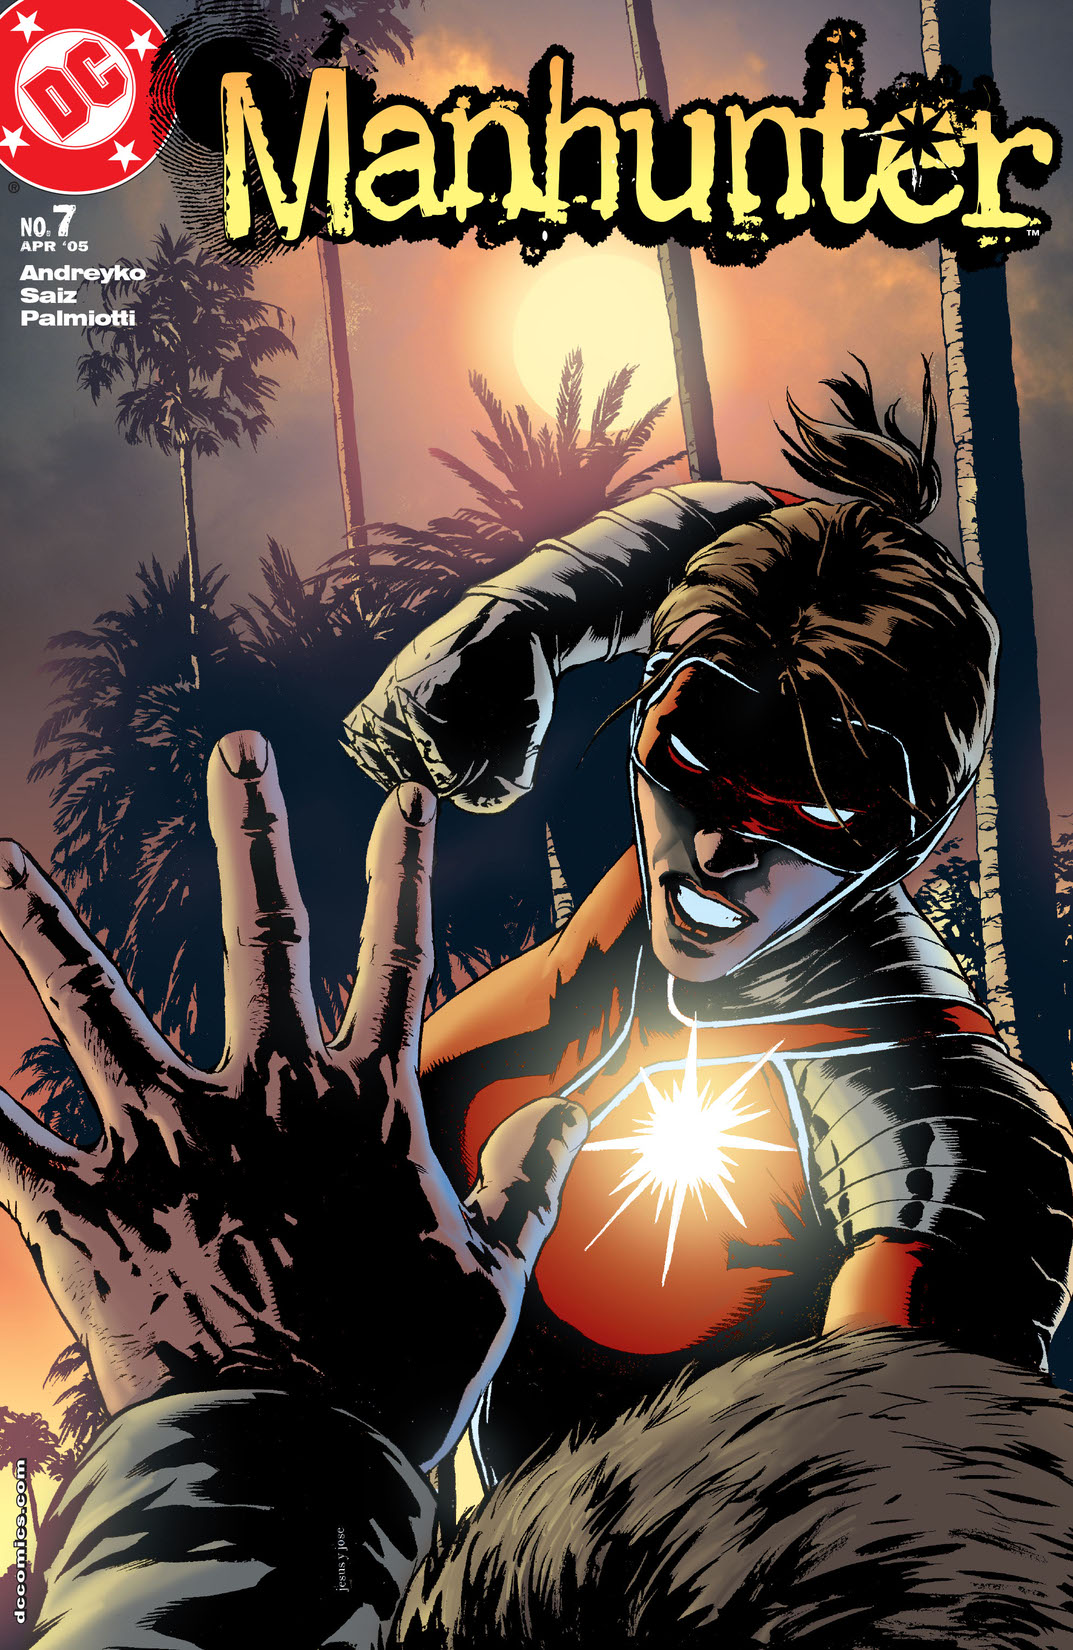 Manhunter (2004-) #7 preview images